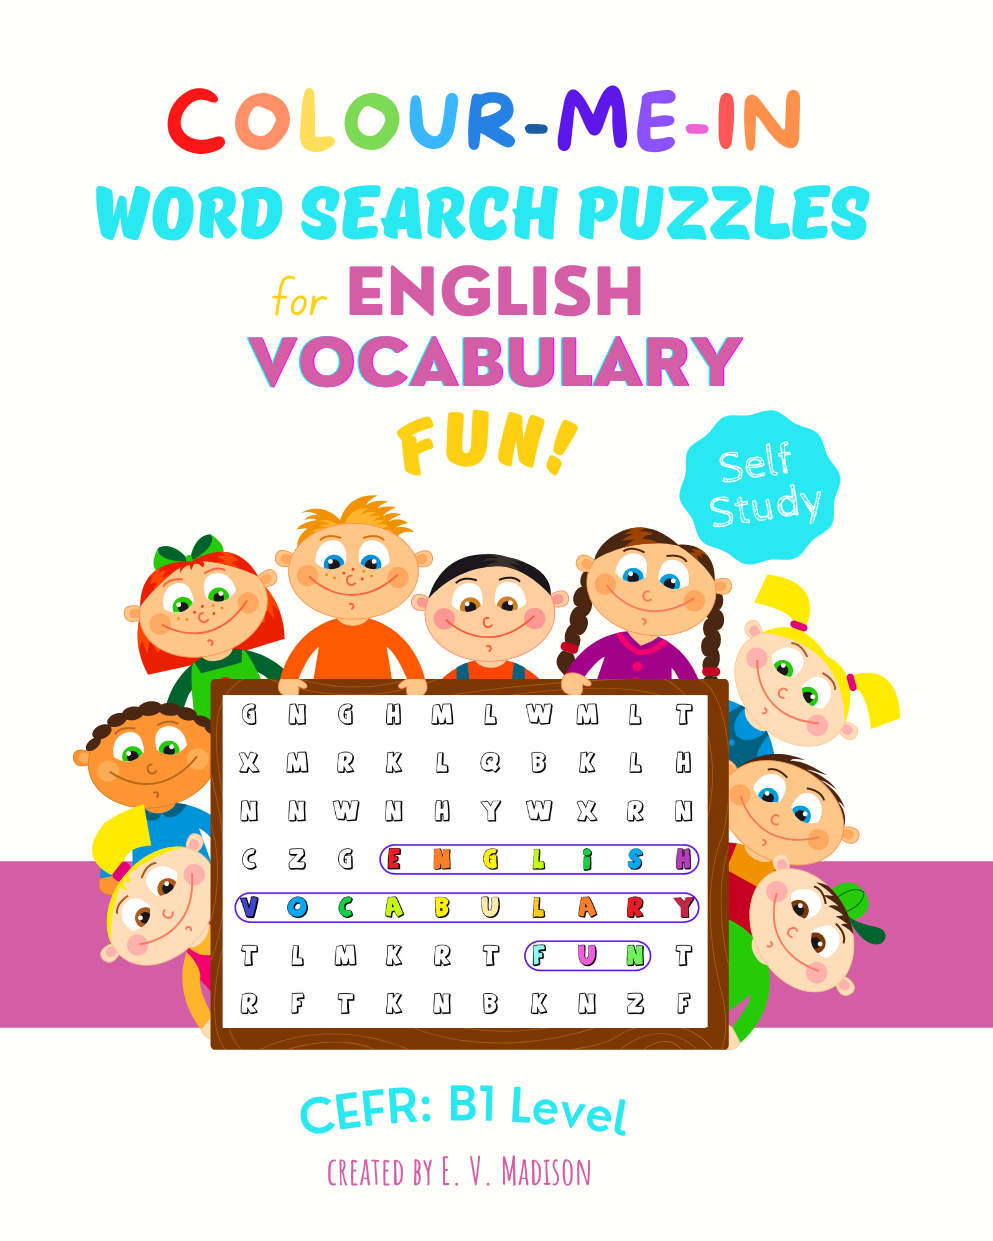 Colour-Me-In Word Search Puzzles for English Vocabulary Fun! B1 Level